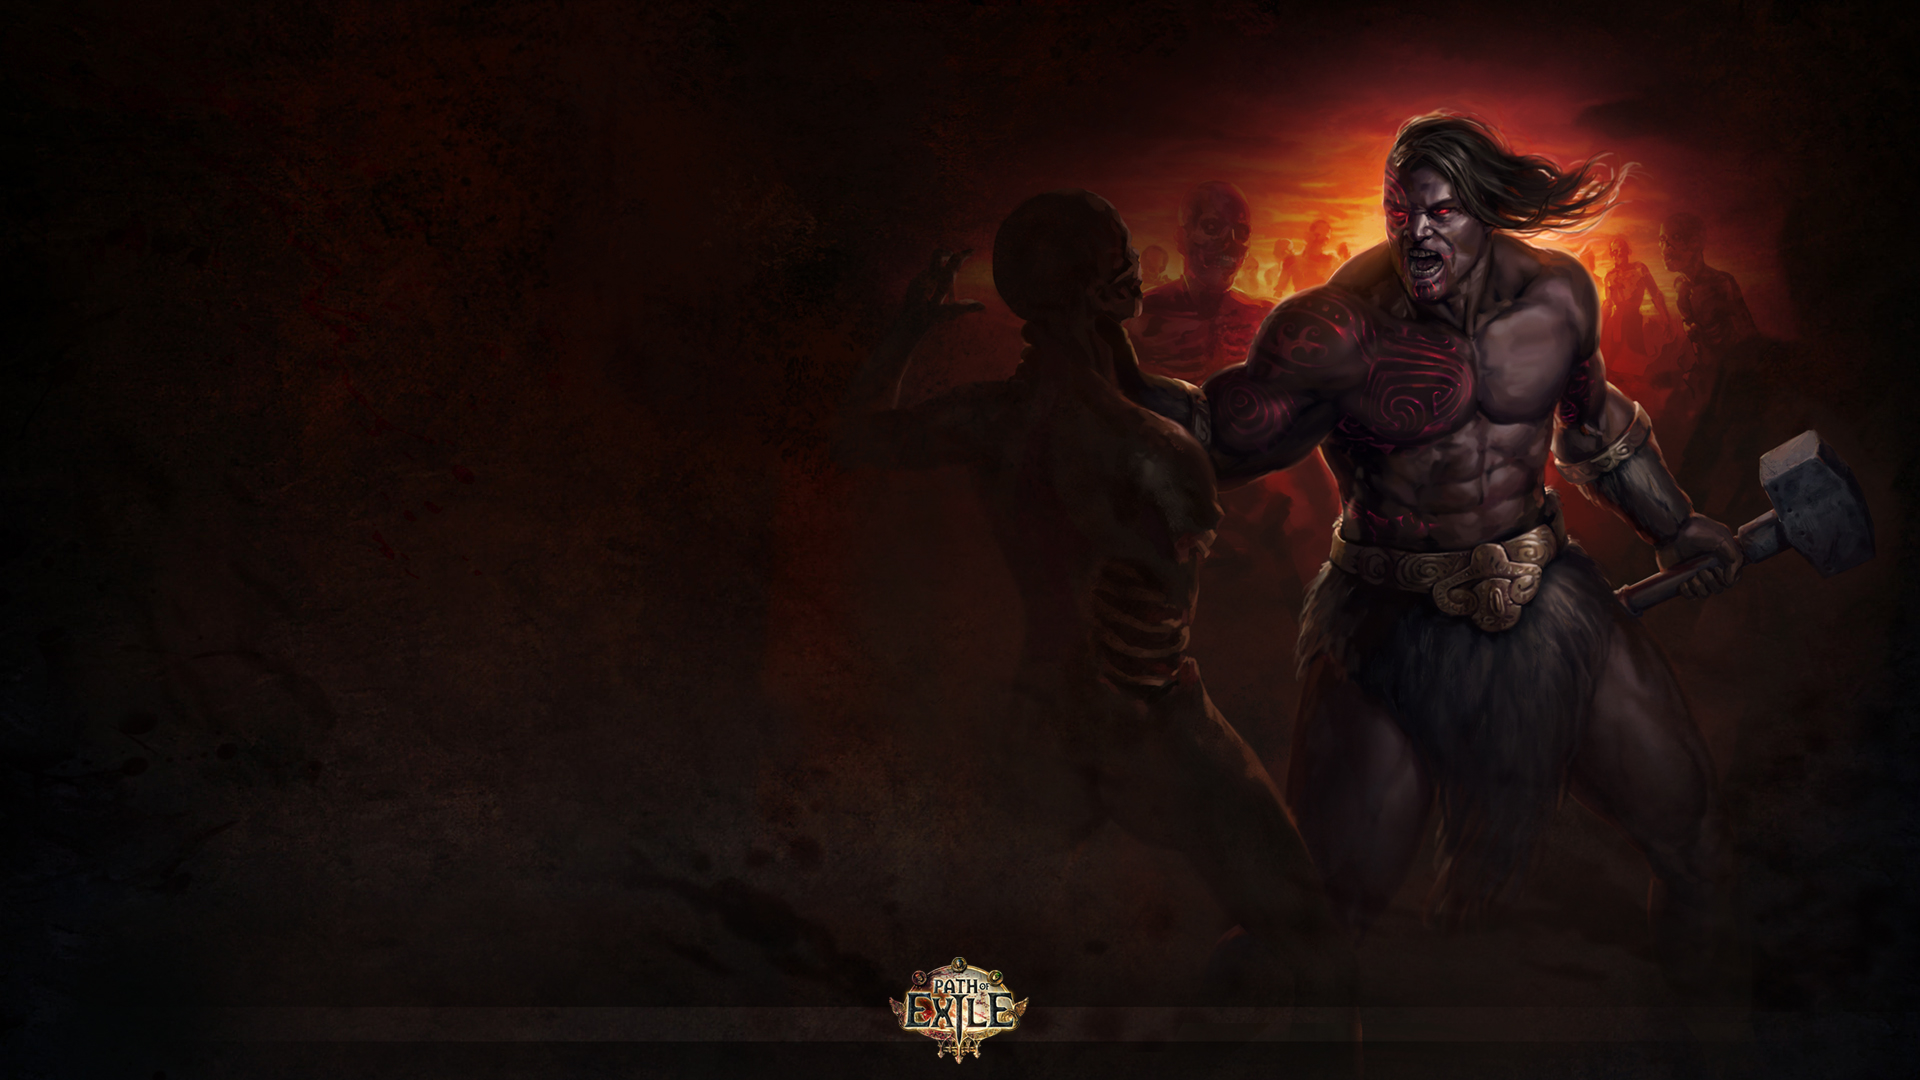 513454 1920x1080 video games path of exile wallpaper JPG 696 kB  Rare  Gallery HD Wallpapers